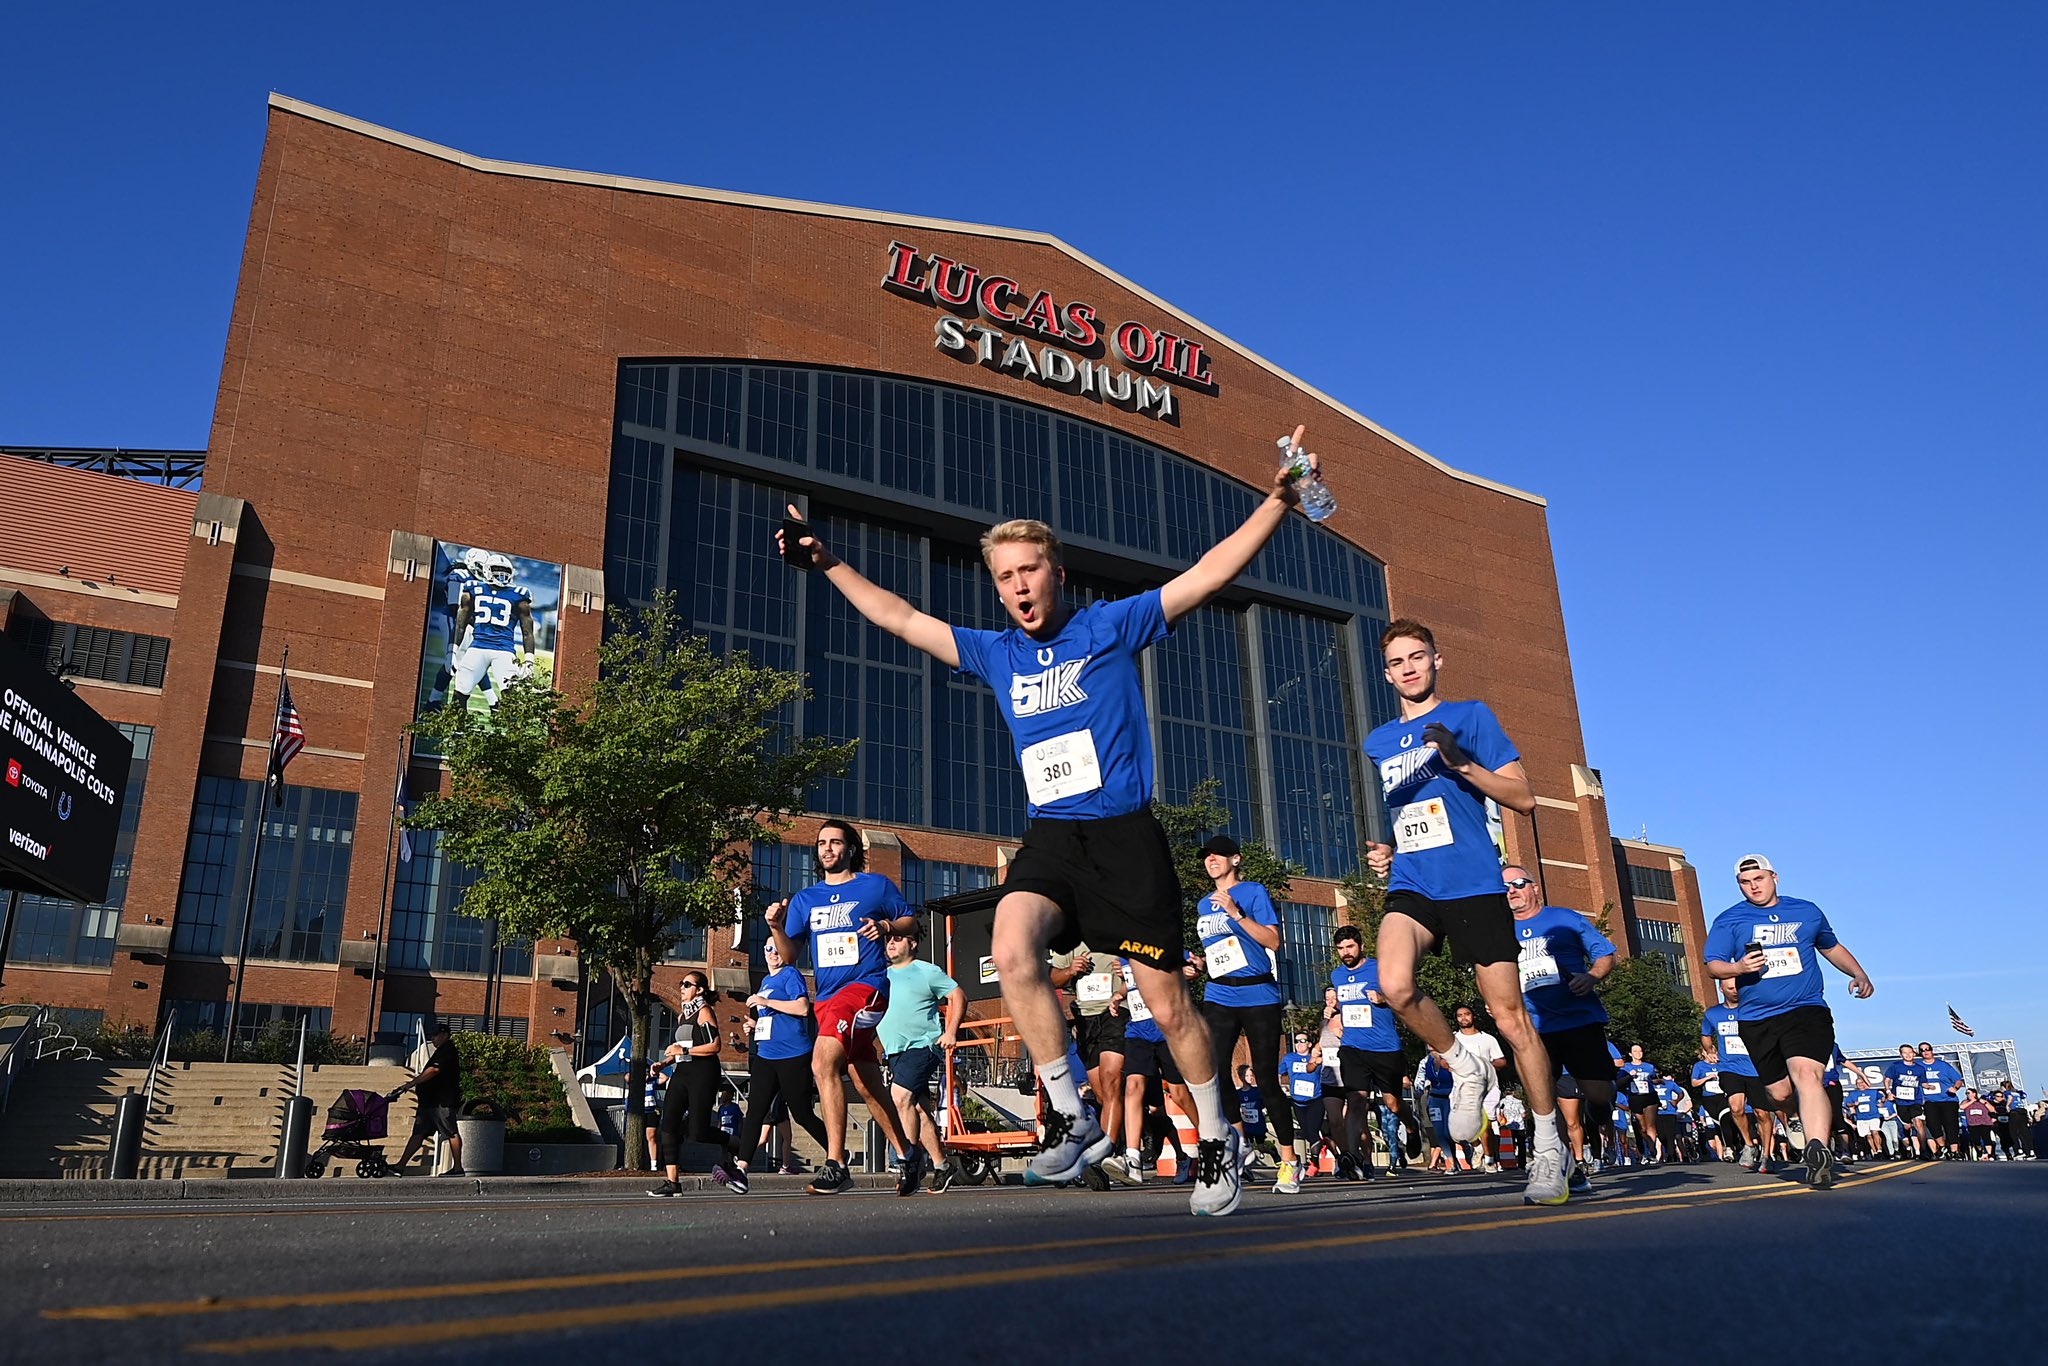 Colts Life on X: 'Colts fans, did you know that your Colts 5K